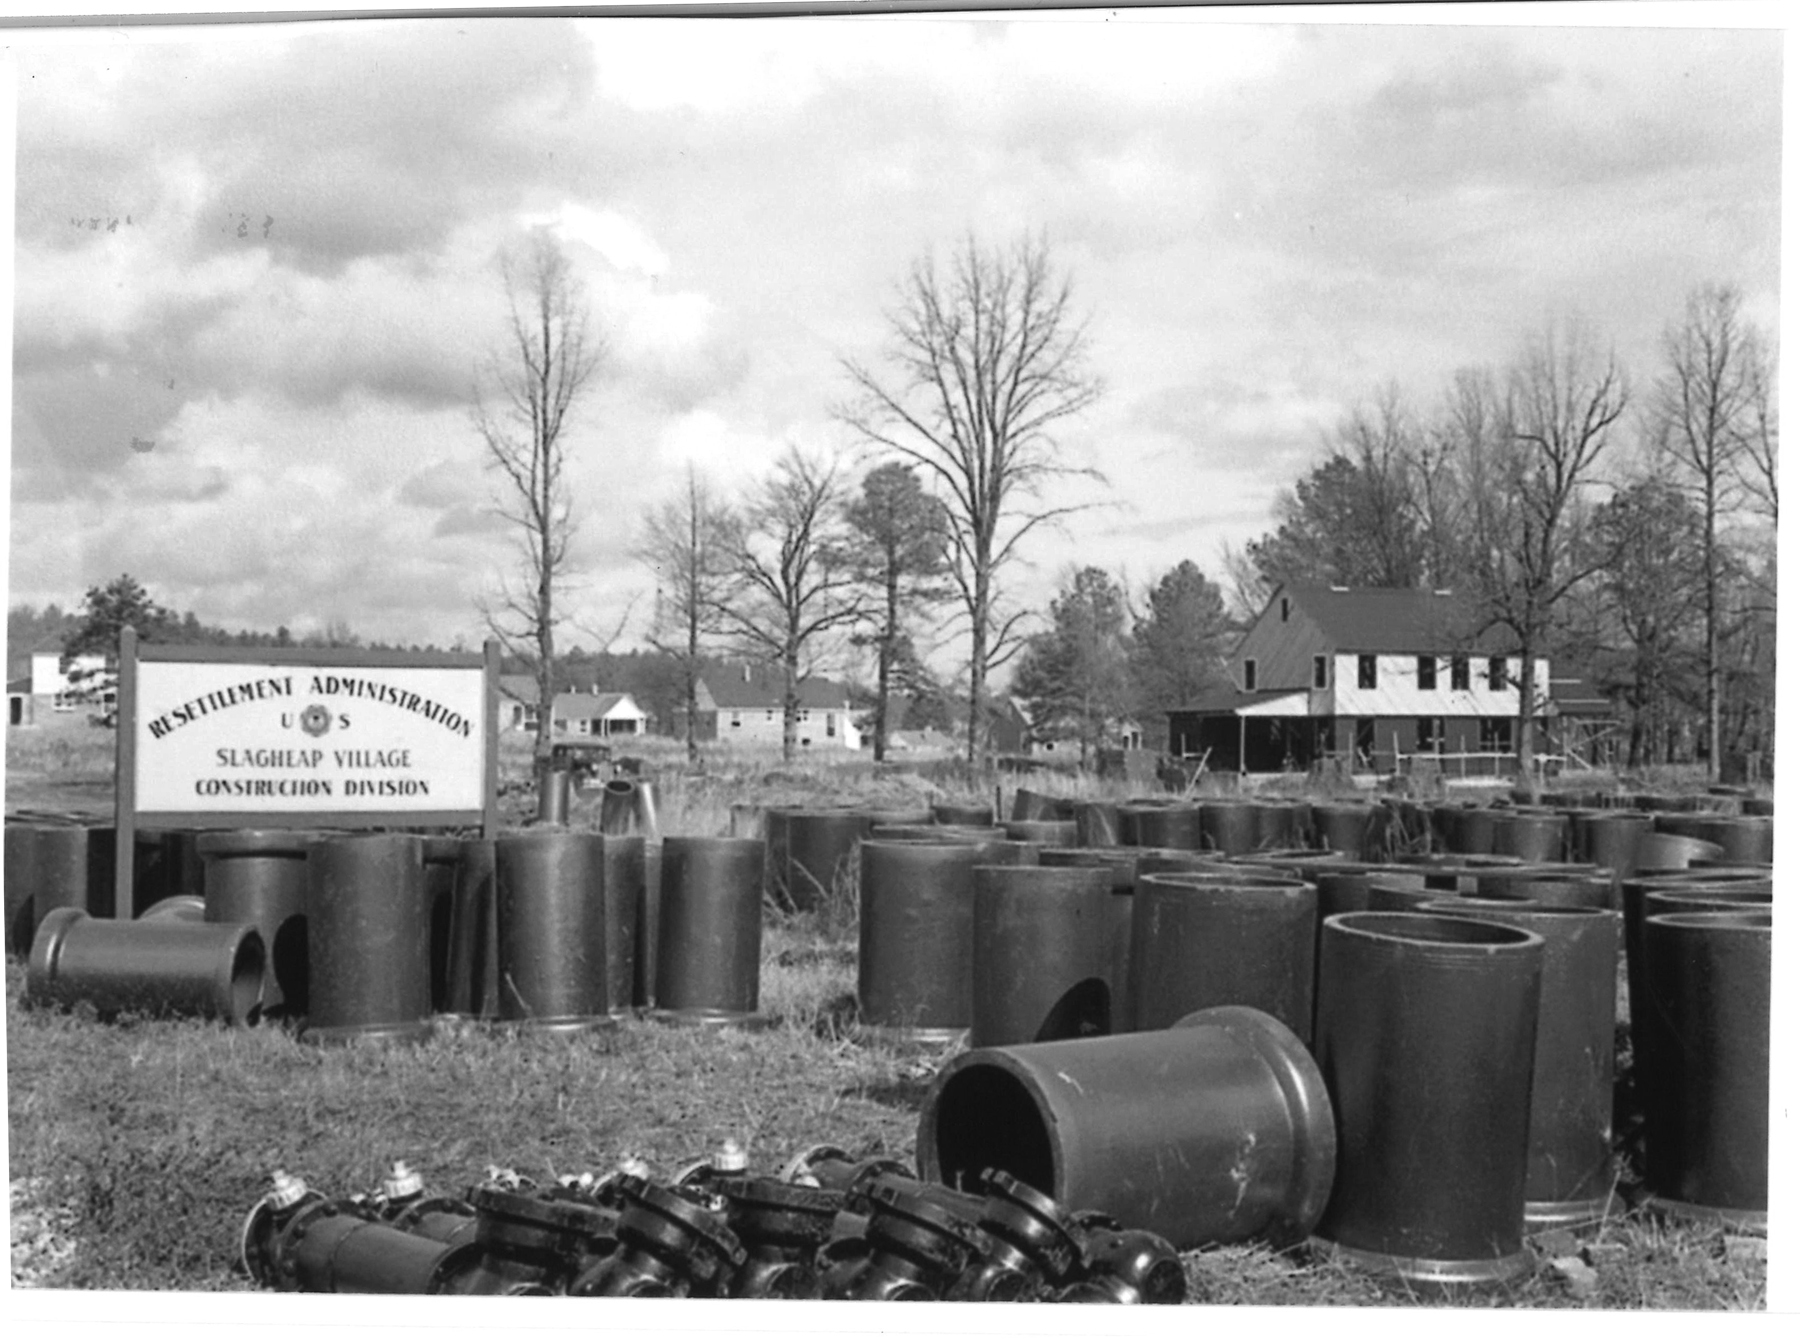 Countdown to 70: Trussville purchases sewage facilities from U.S. government